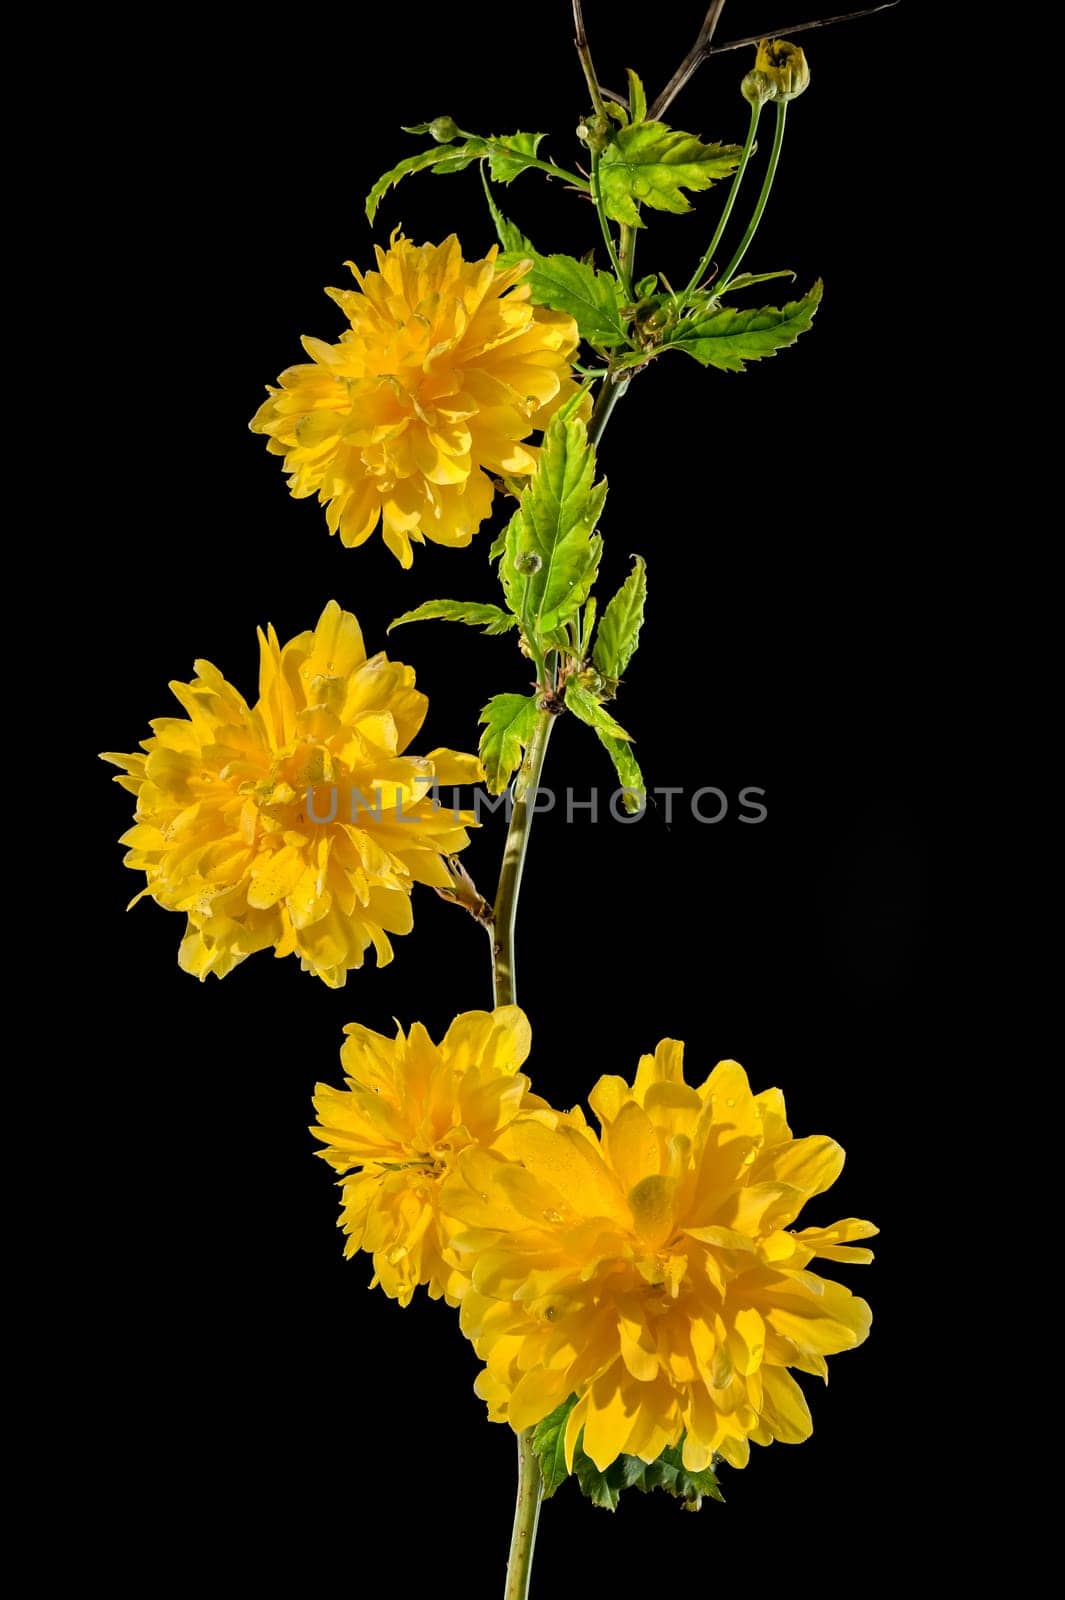 Blooming kerria japonica flowers on a black background by Multipedia